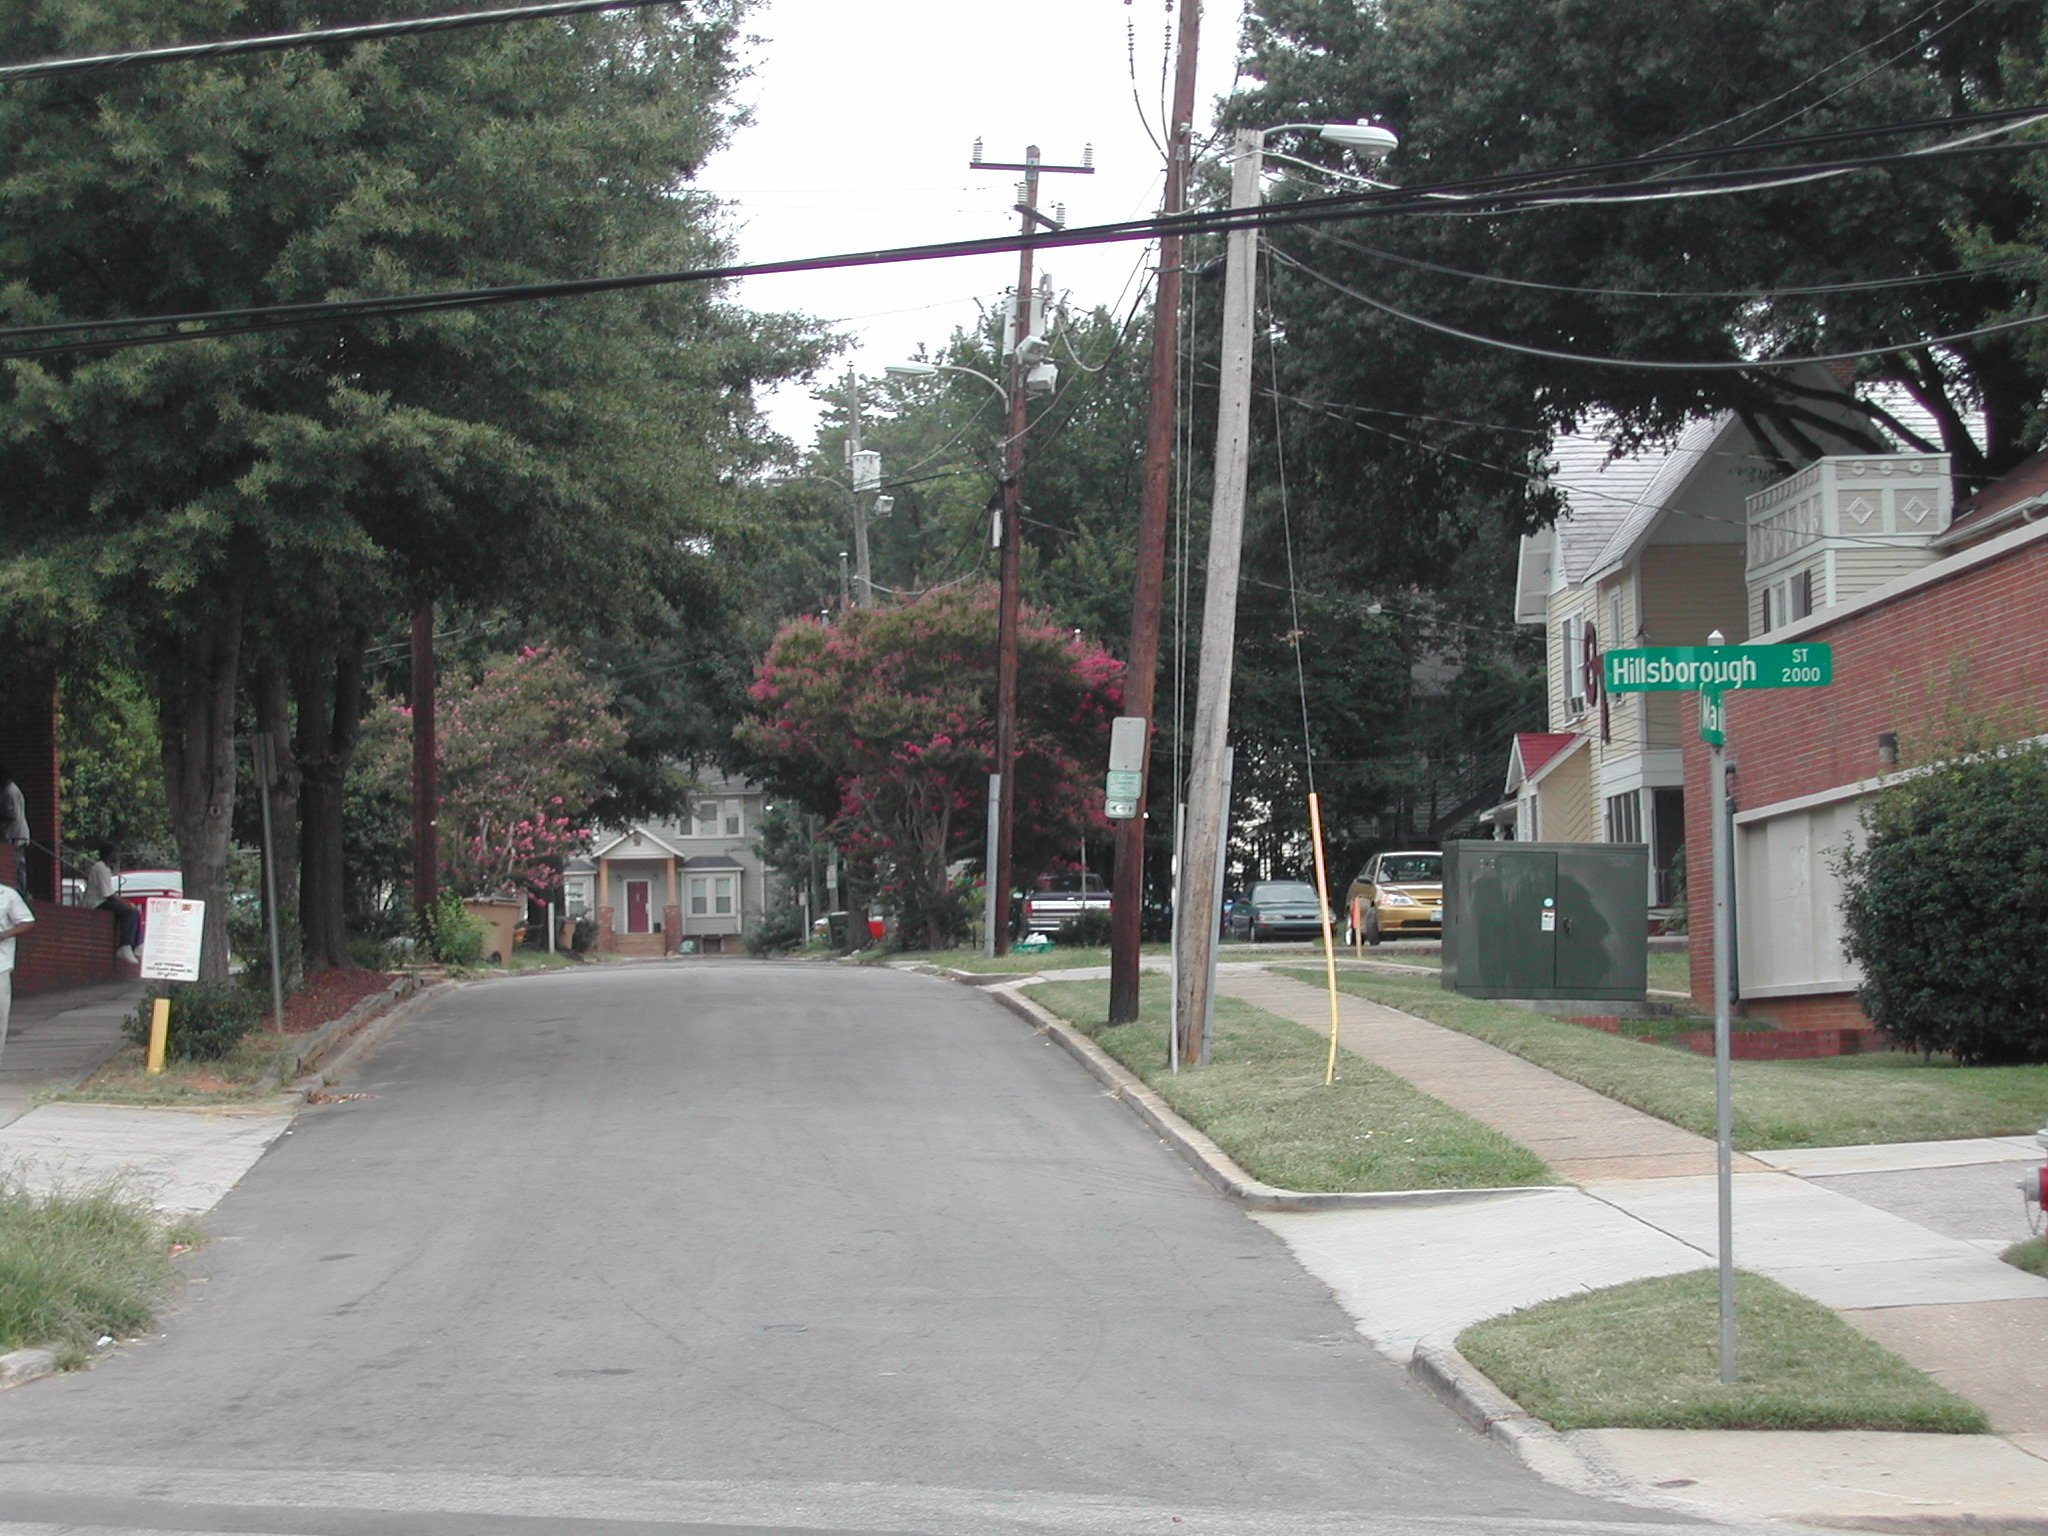 a quiet residential street is shown on the right